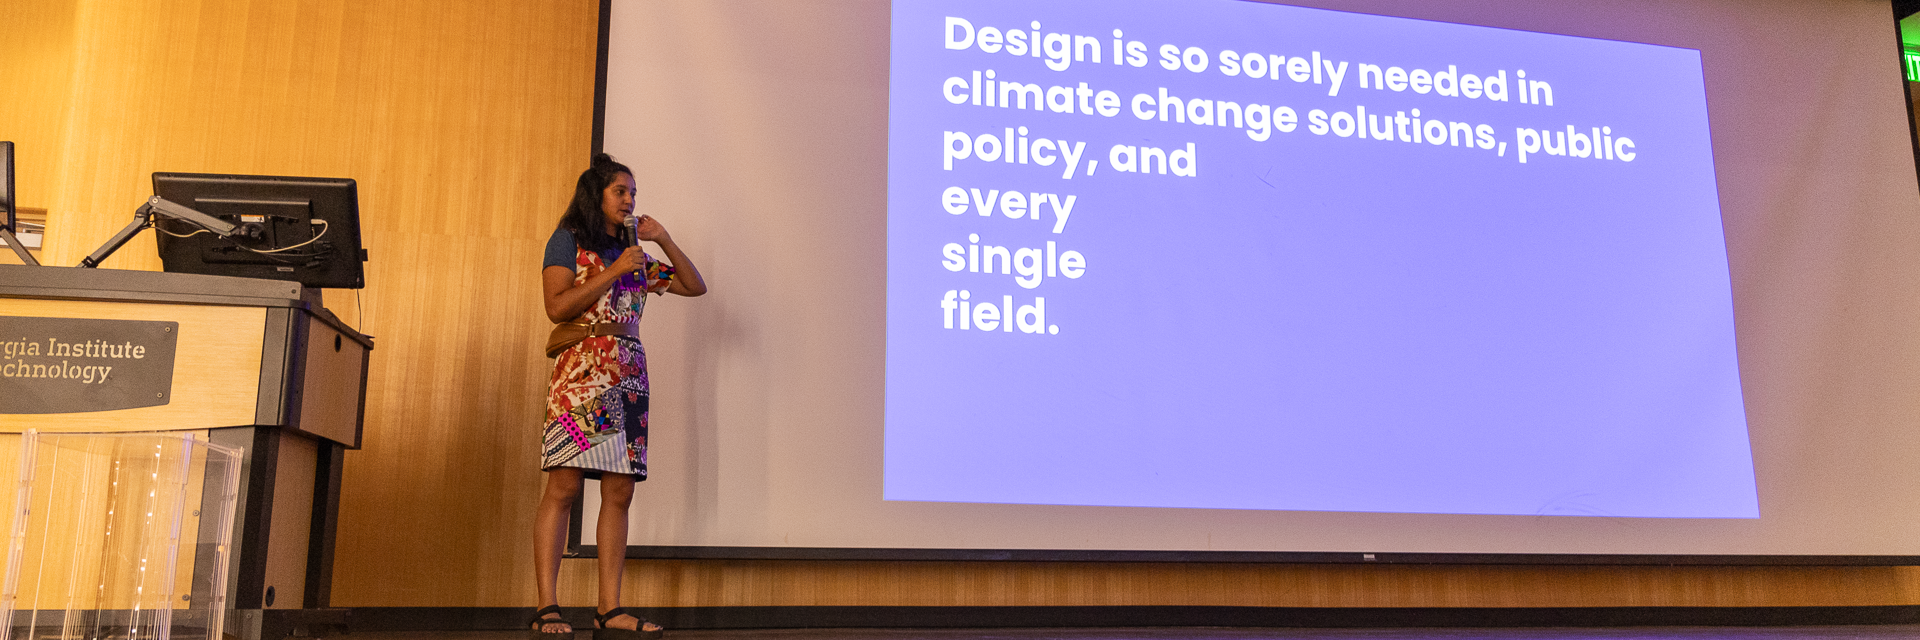 Krystal Persaud on stage at Reinsch Pierce Auditorium. A projection screen beside her reads, "Design is so sorely needed in climate change solutions, public policy, and every single field."